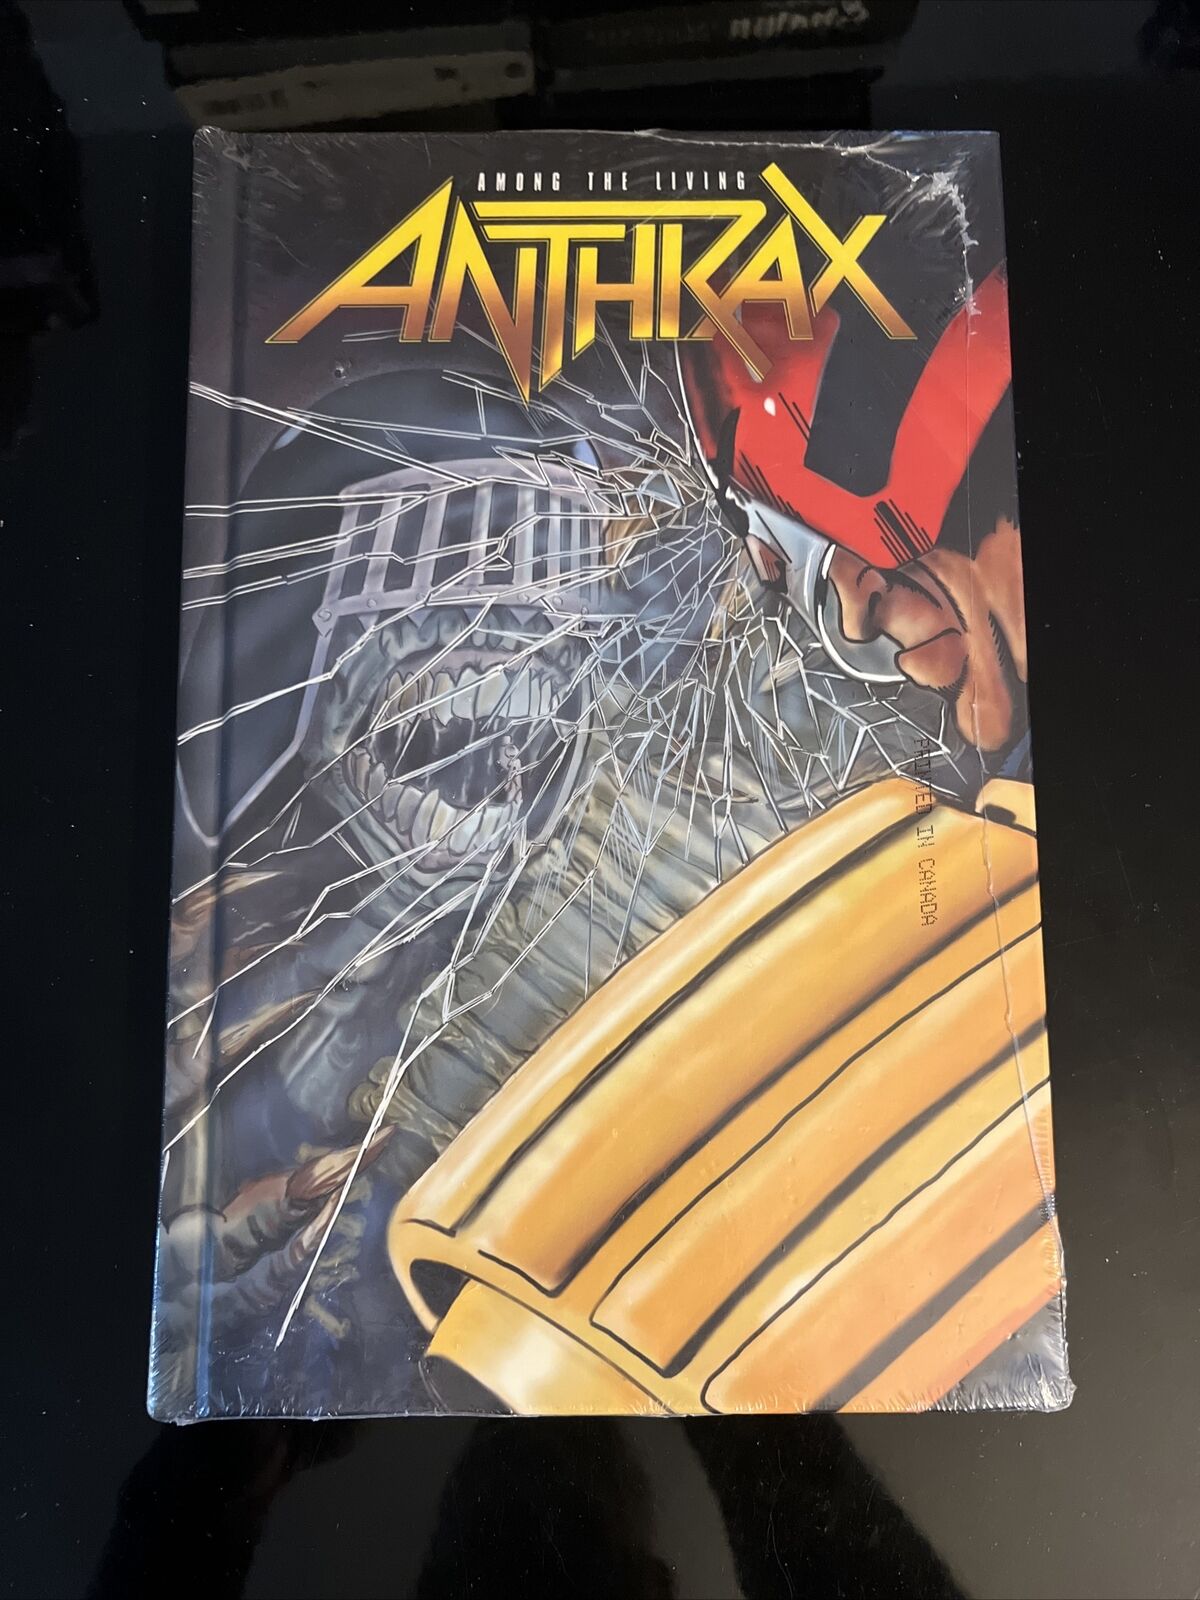 Anthrax - Among The Living Exclusive Judge Dredd Variant Cover HC Z2 Comics